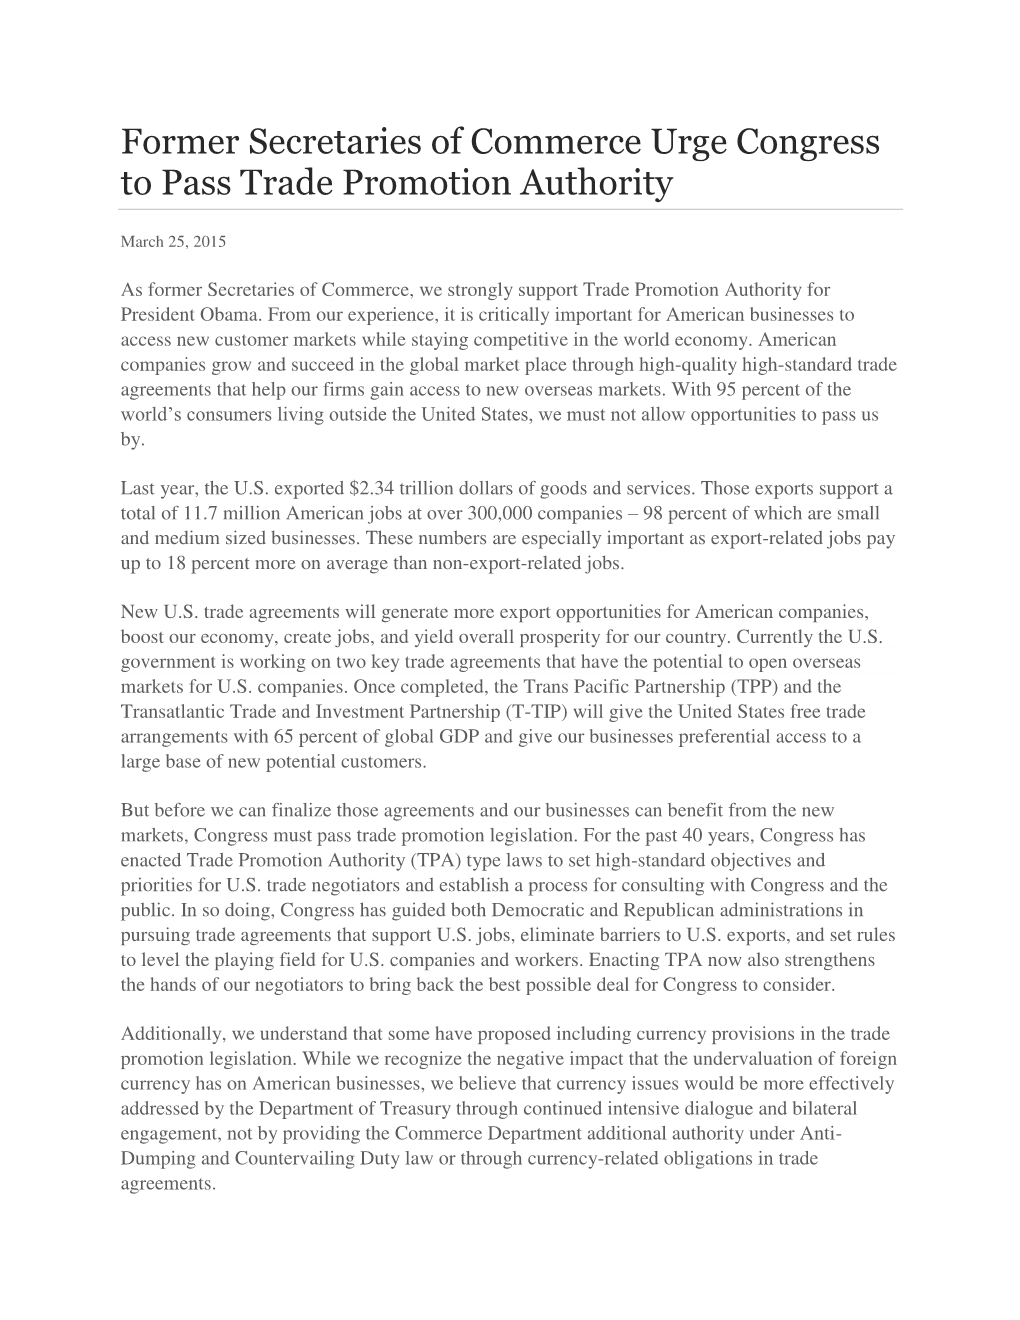 Former Secretaries of Commerce Urge Congress to Pass Trade Promotion Authority